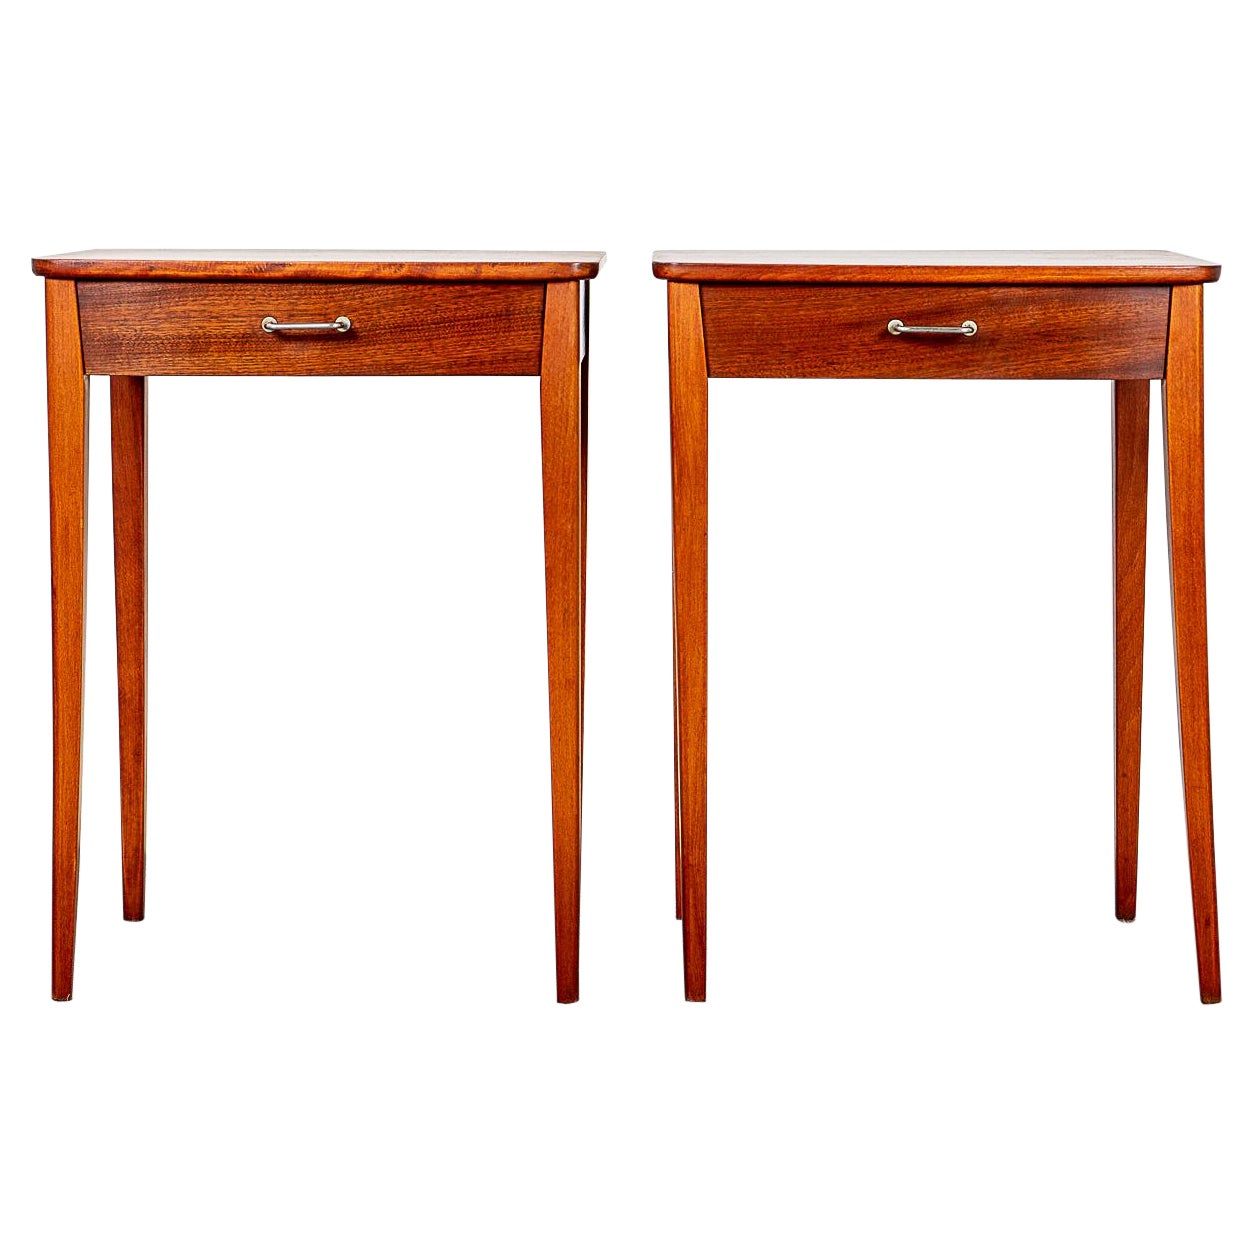 Danish Mid-Century Modern Mahogany Bedside Table Pair For Sale